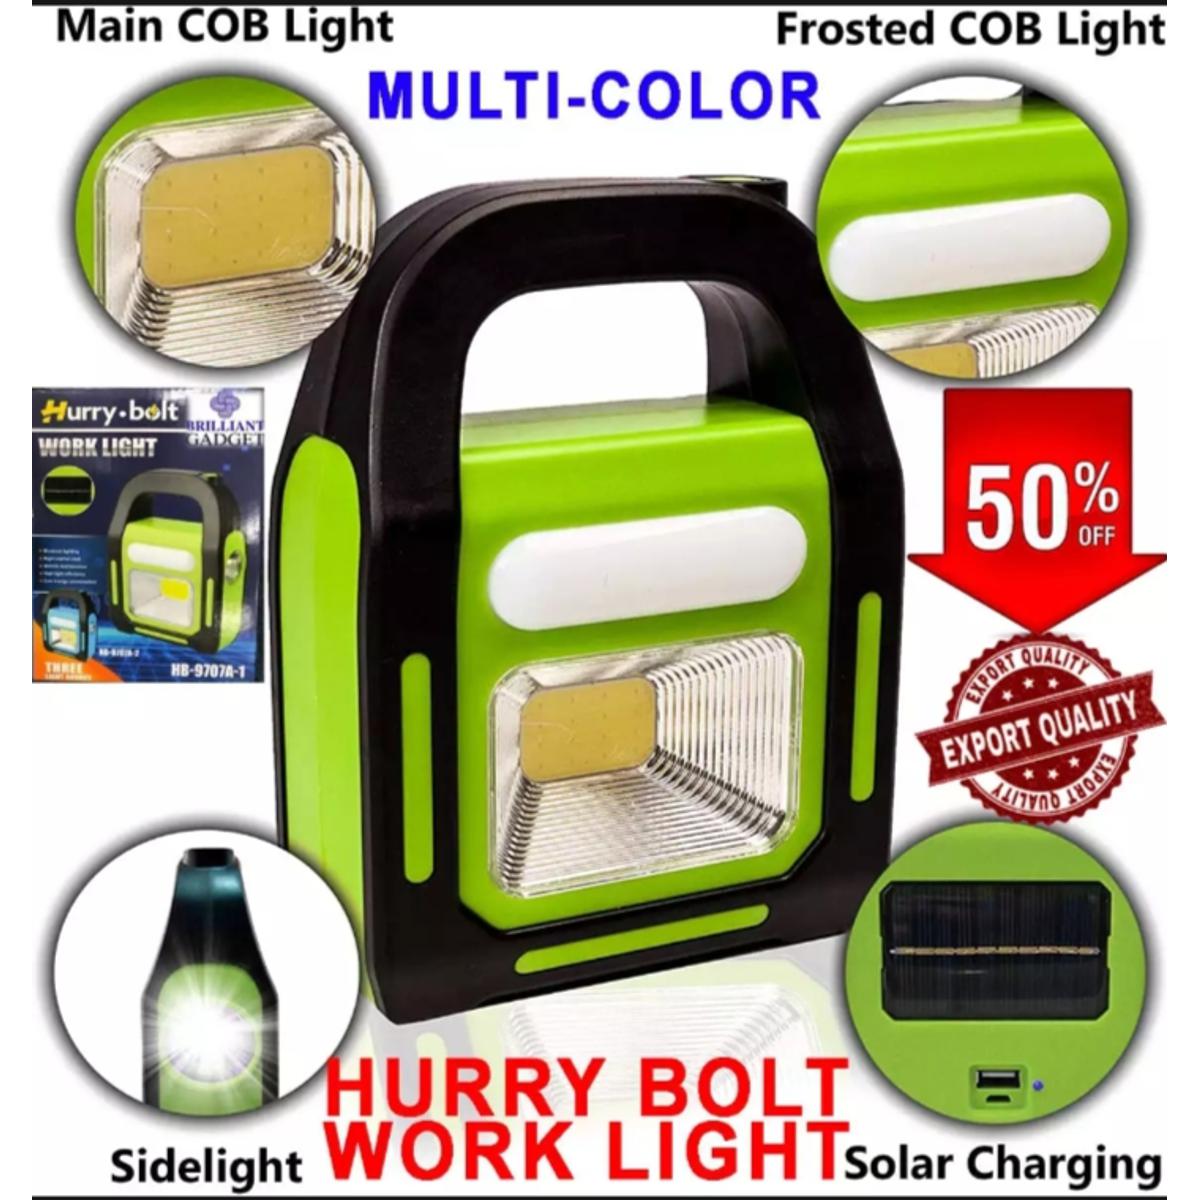 Genuine LED Work Light Hurry Bolt Work Lamp Solar Flashlight Rechargeable Emergency torch Lumens COB 3 Lights Spotlights Built-in Battery for Camping Household Workshop Automobile Multifunctional MULTICOLOR 20W 2000 Imported Best Original